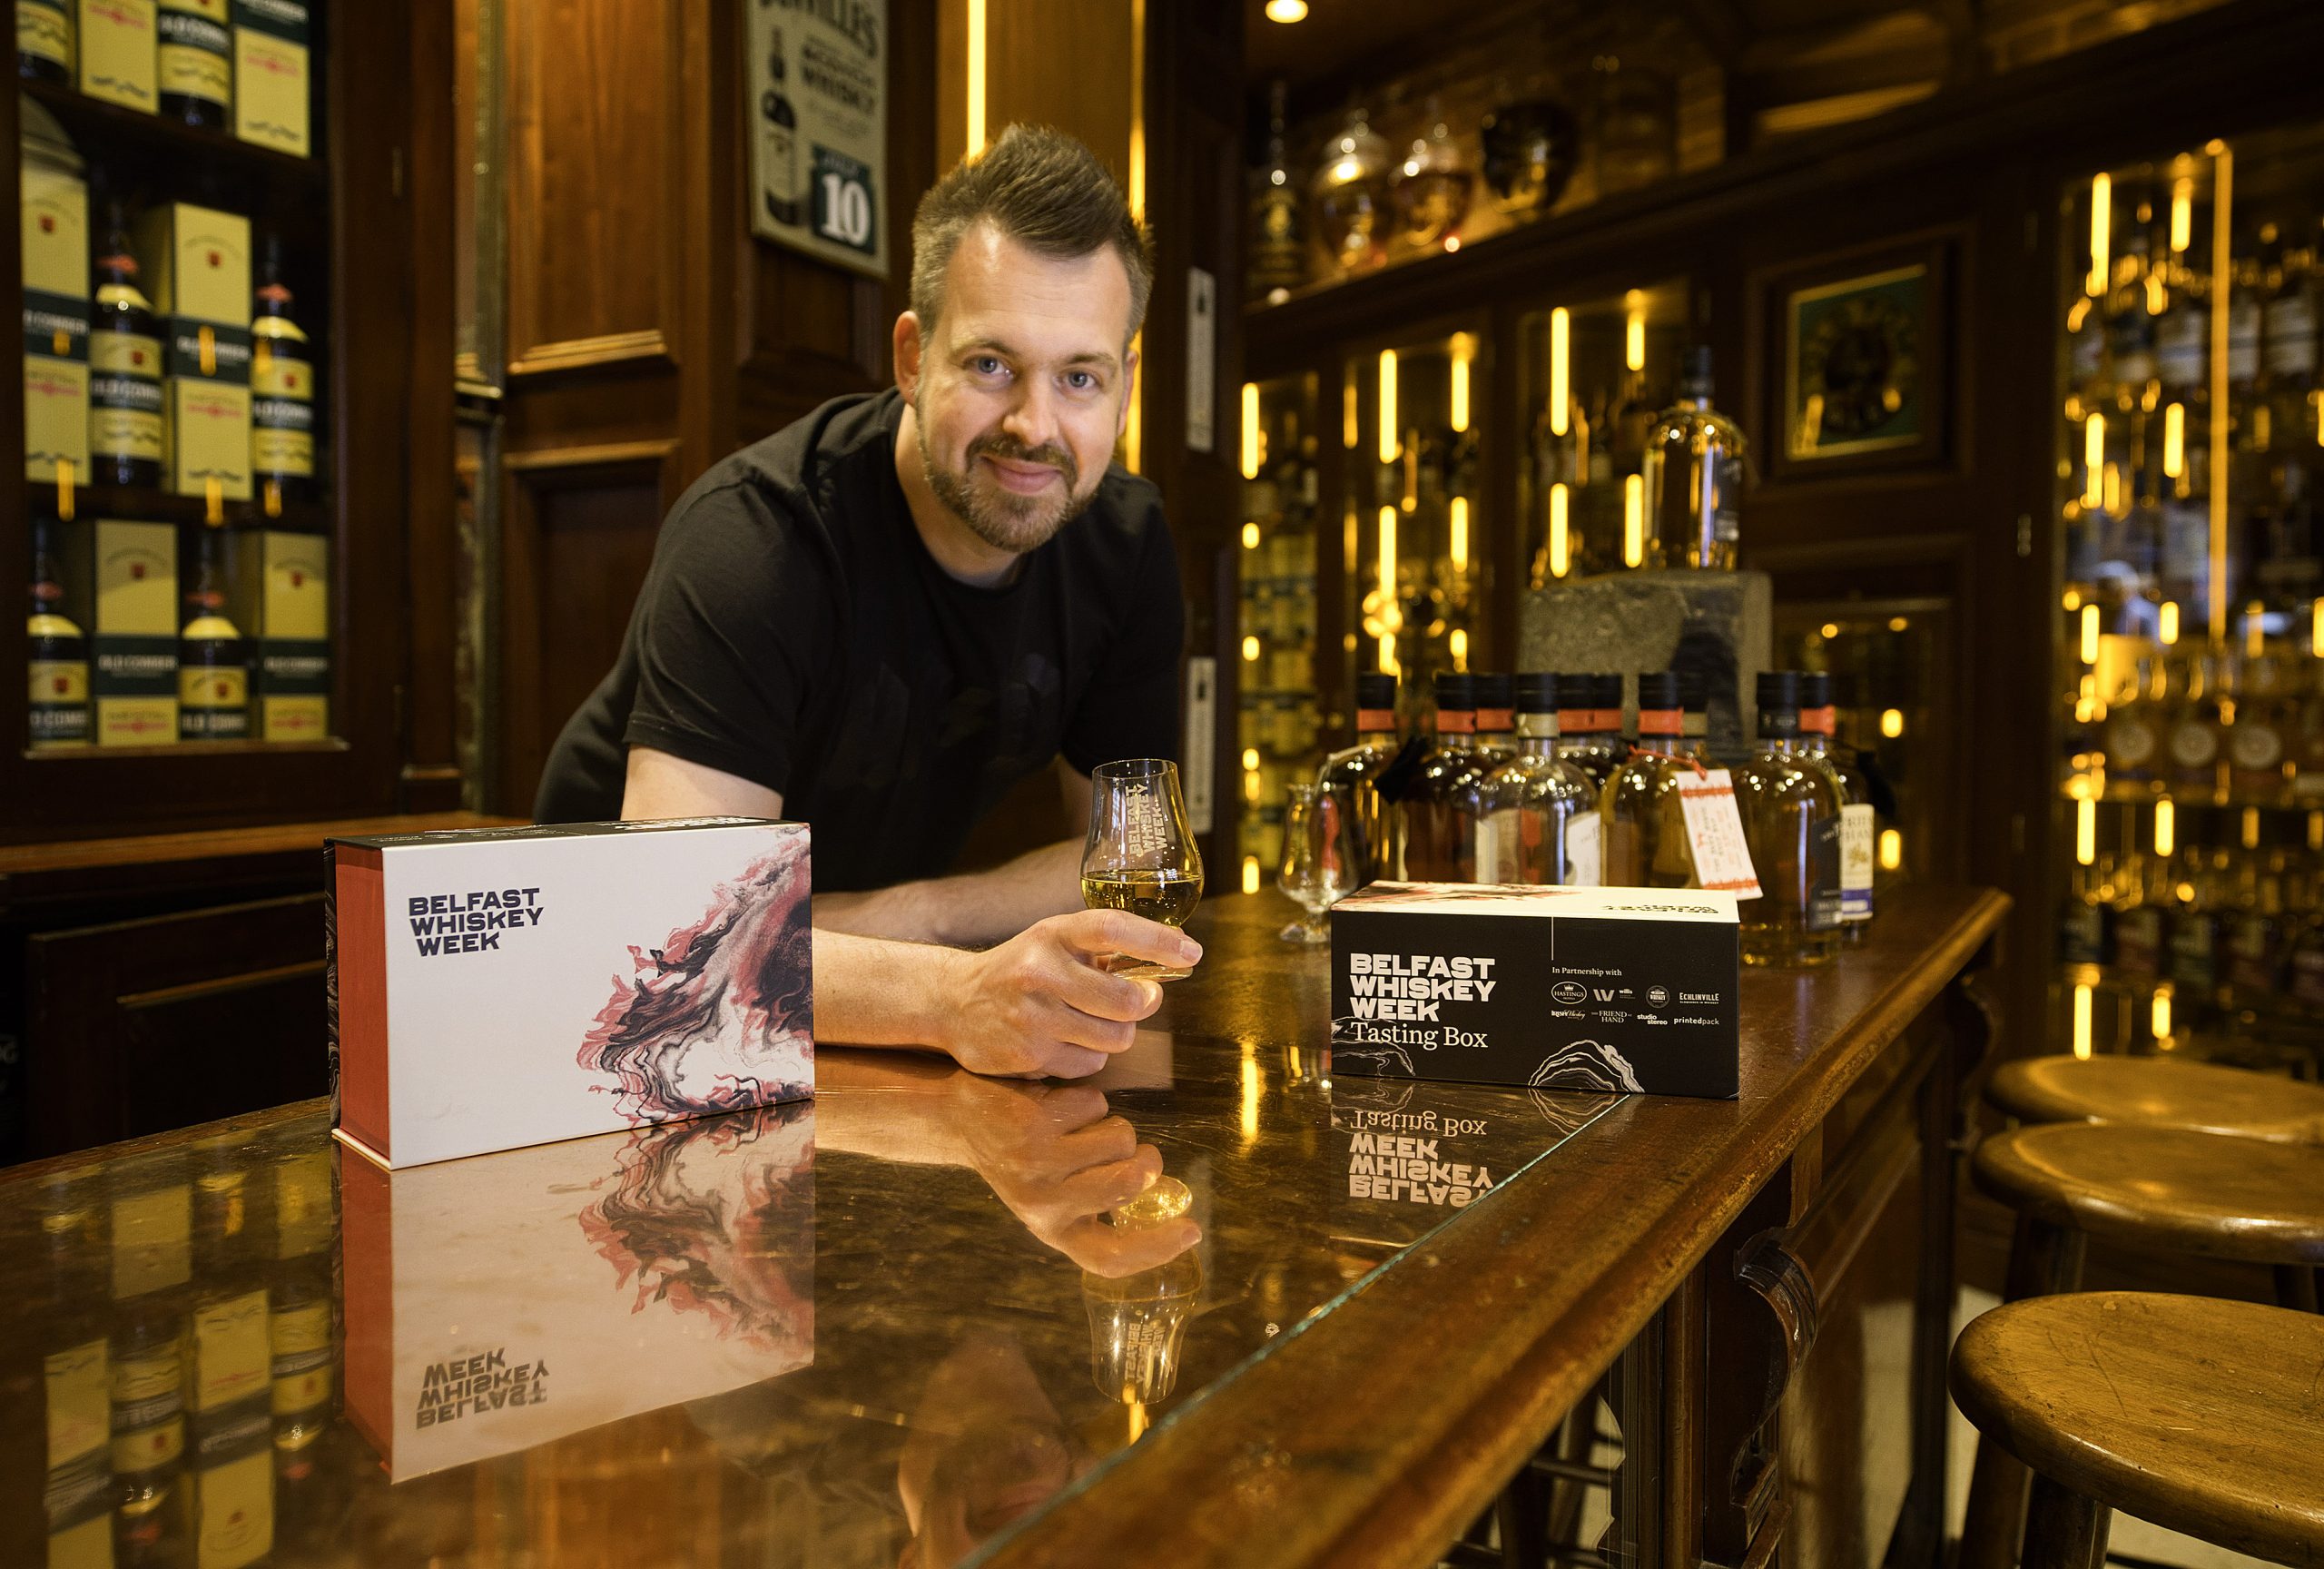 All systems go for third Belfast Whiskey Week